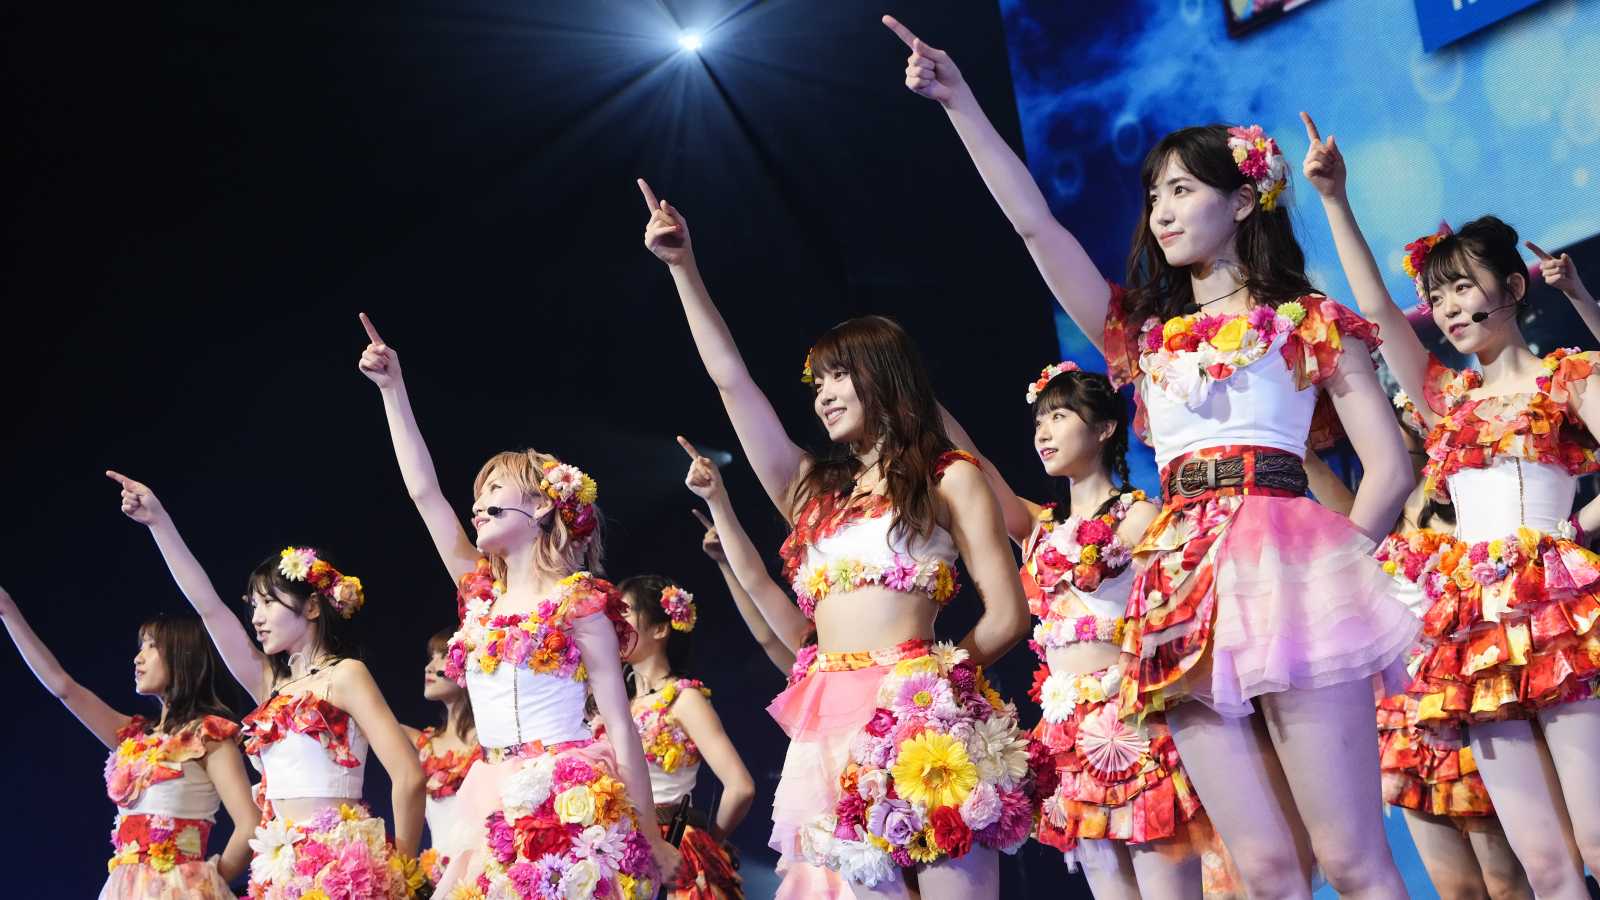 AKB48 Group Asia Festival 2021 ONLINE 27.6.2021 © AKB48 GROUP ASIA FESTIVAL 2021 ONLINE Executive Committee